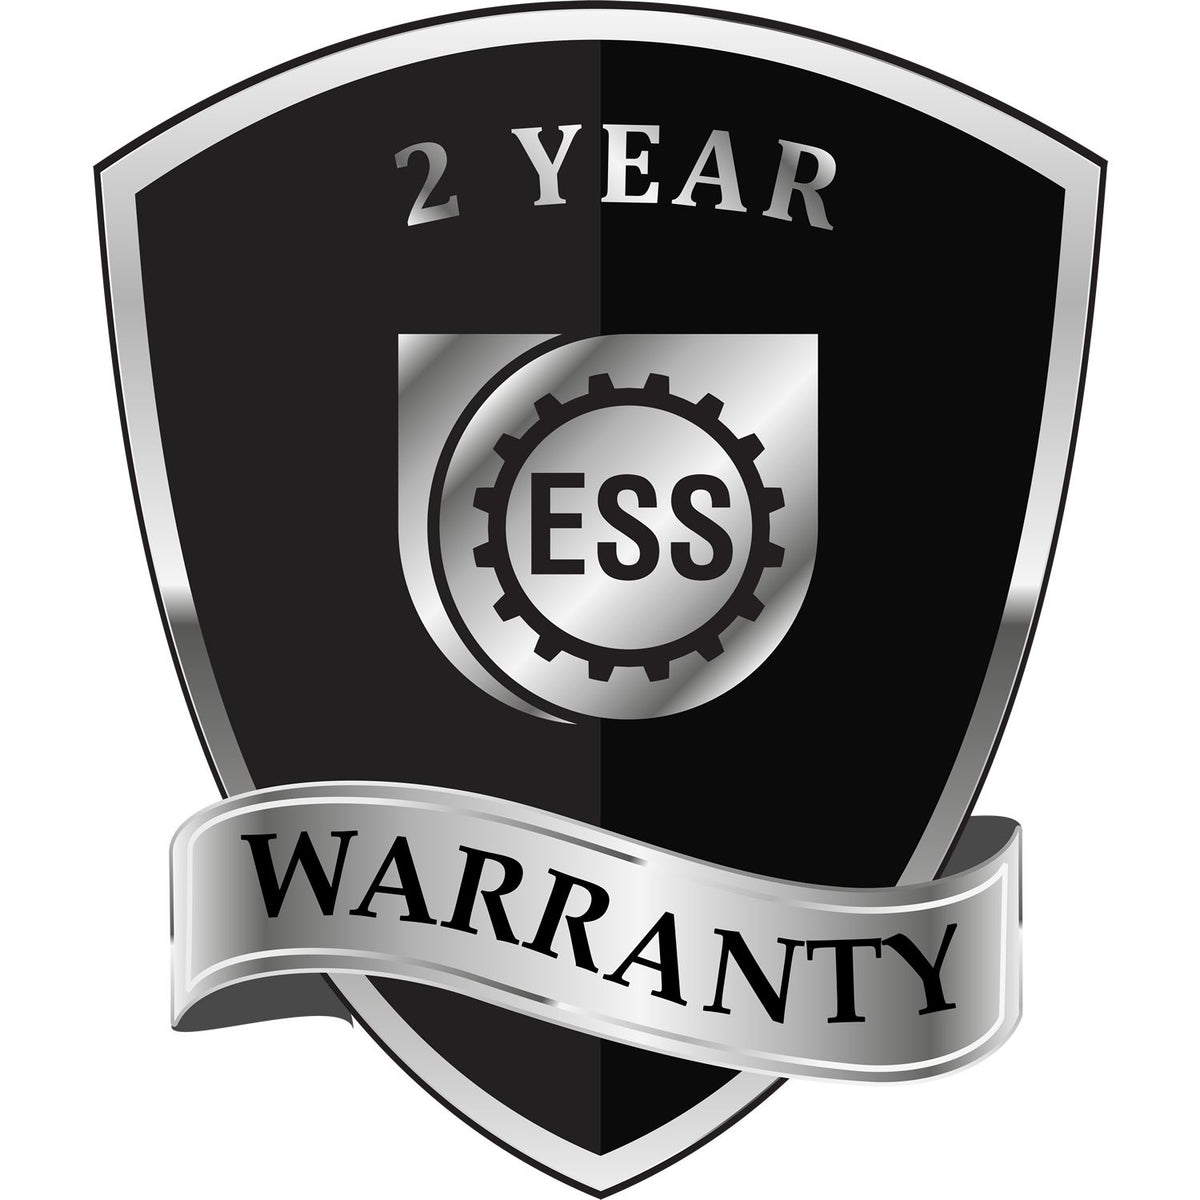 A badge or emblem showing a warranty icon for the Extended Long Reach Alaska Architect Seal Embosser